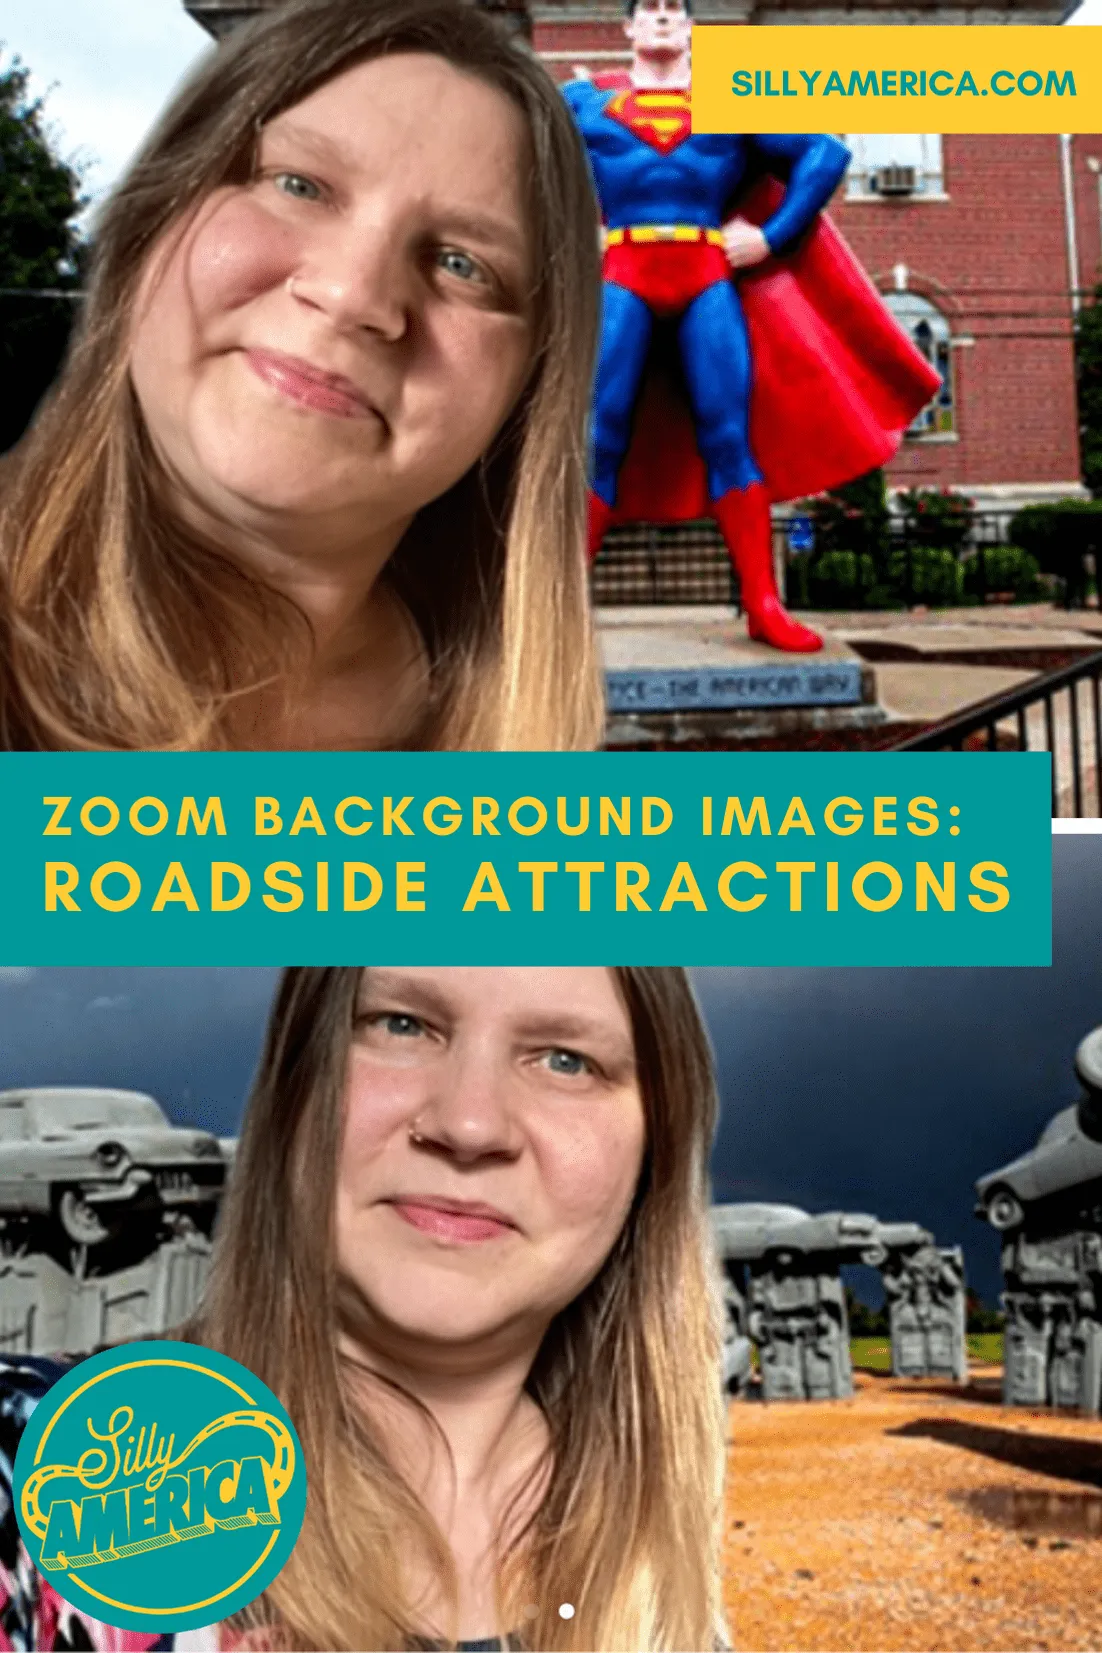 If you're a roadtripper who wishes you were behind the wheel instead of working from home, try these Zoom background images of roadside attractions as a virtual teleconference backdrop while you work from home.  #WorkFromHome #Zoom #ZoomBackgrounds #ZoomBackdrops #RoadsideAttraction #RoadsideAttractions #WeirdRoadsideAttractions #VintageRoadsideAttractions #RoadTripStops #WorldsLargestRoadsideAttractions #RoadTrip #USARoadsideAttractions #AmericanRoadsideAttractions #USA #America